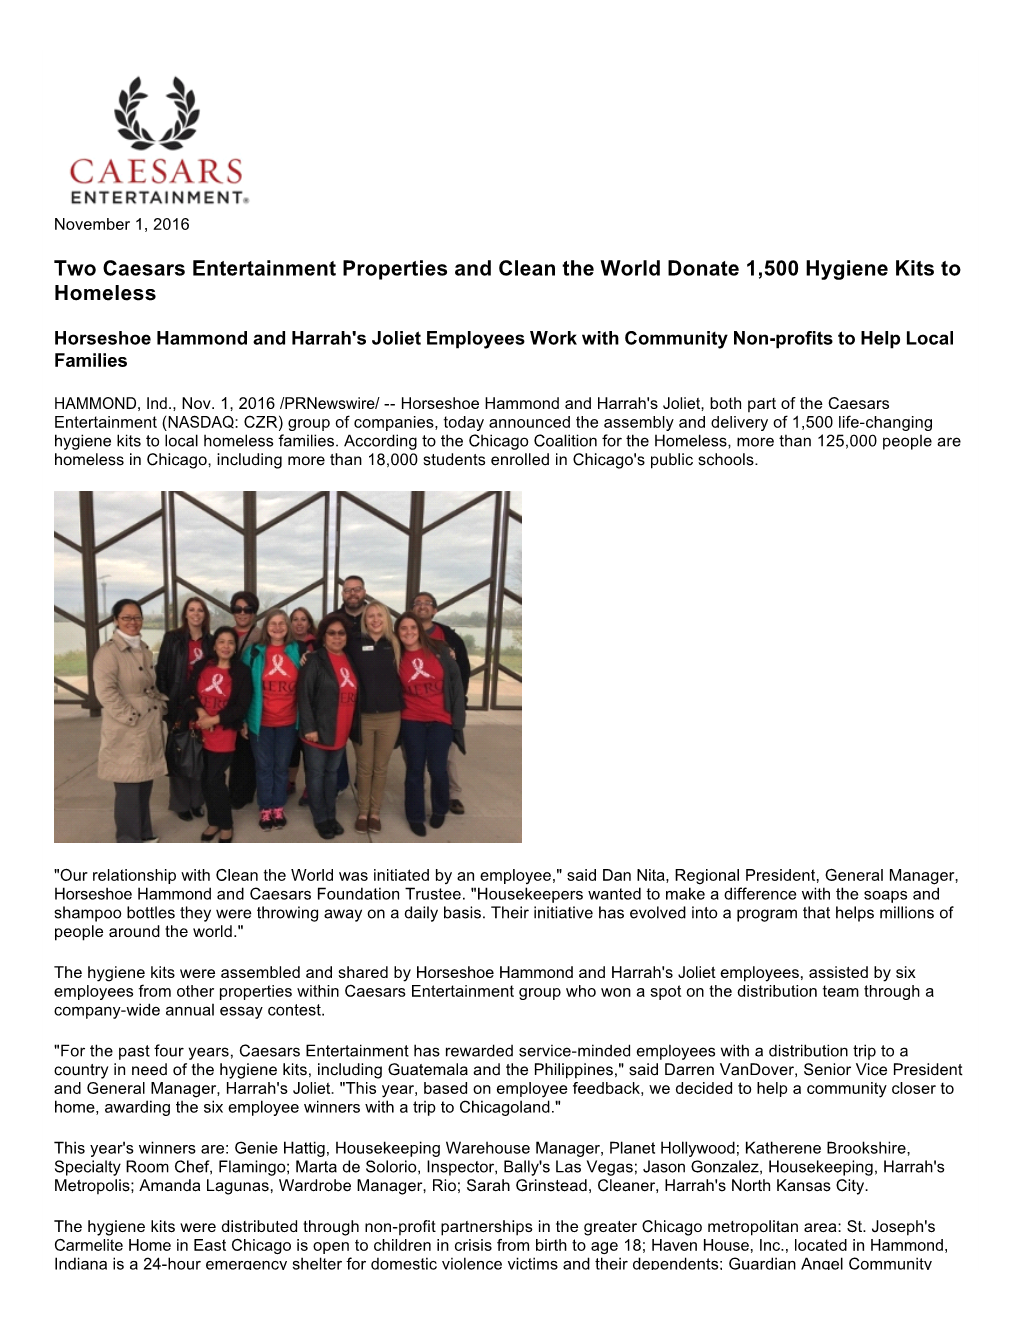 Two Caesars Entertainment Properties and Clean the World Donate 1,500 Hygiene Kits to Homeless